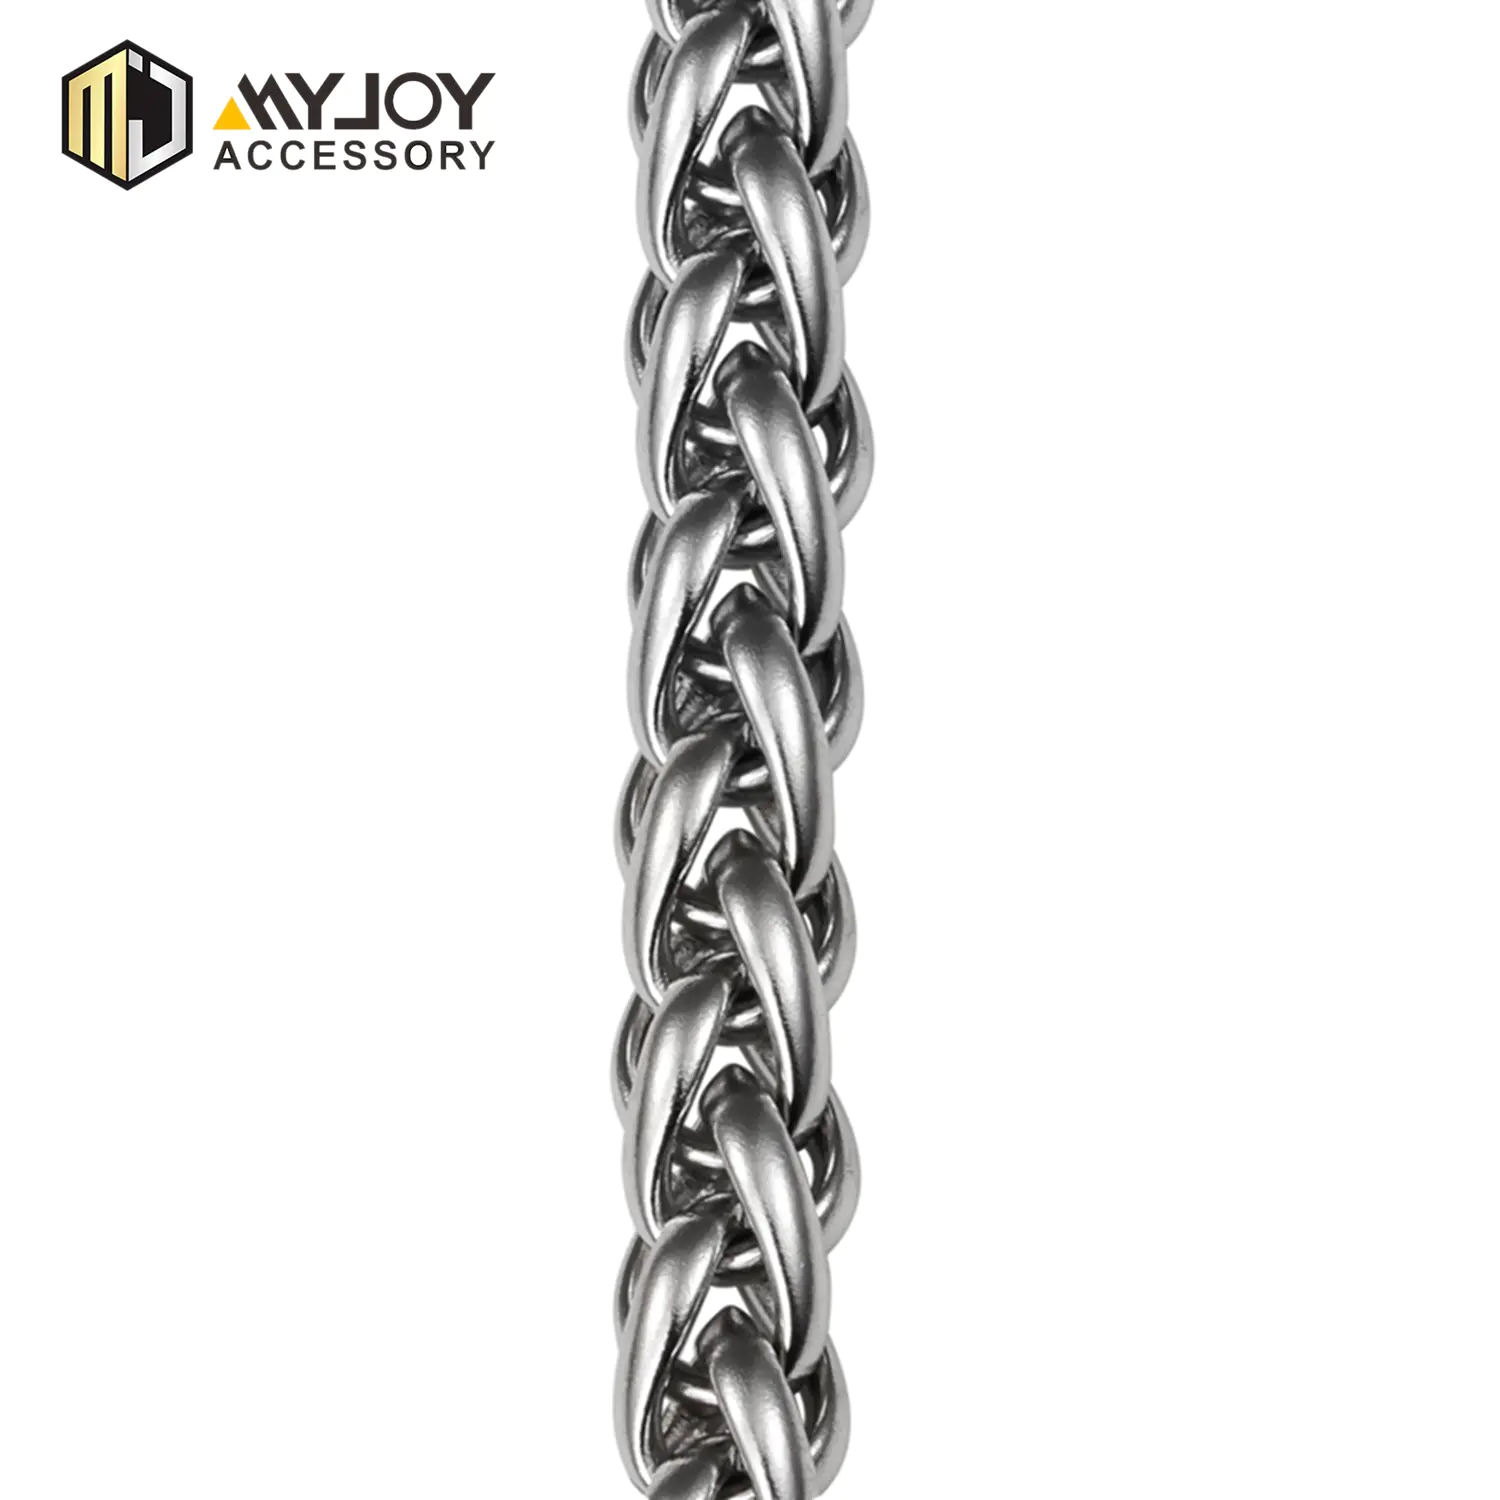 MYJOY Top bag chain for business for bags